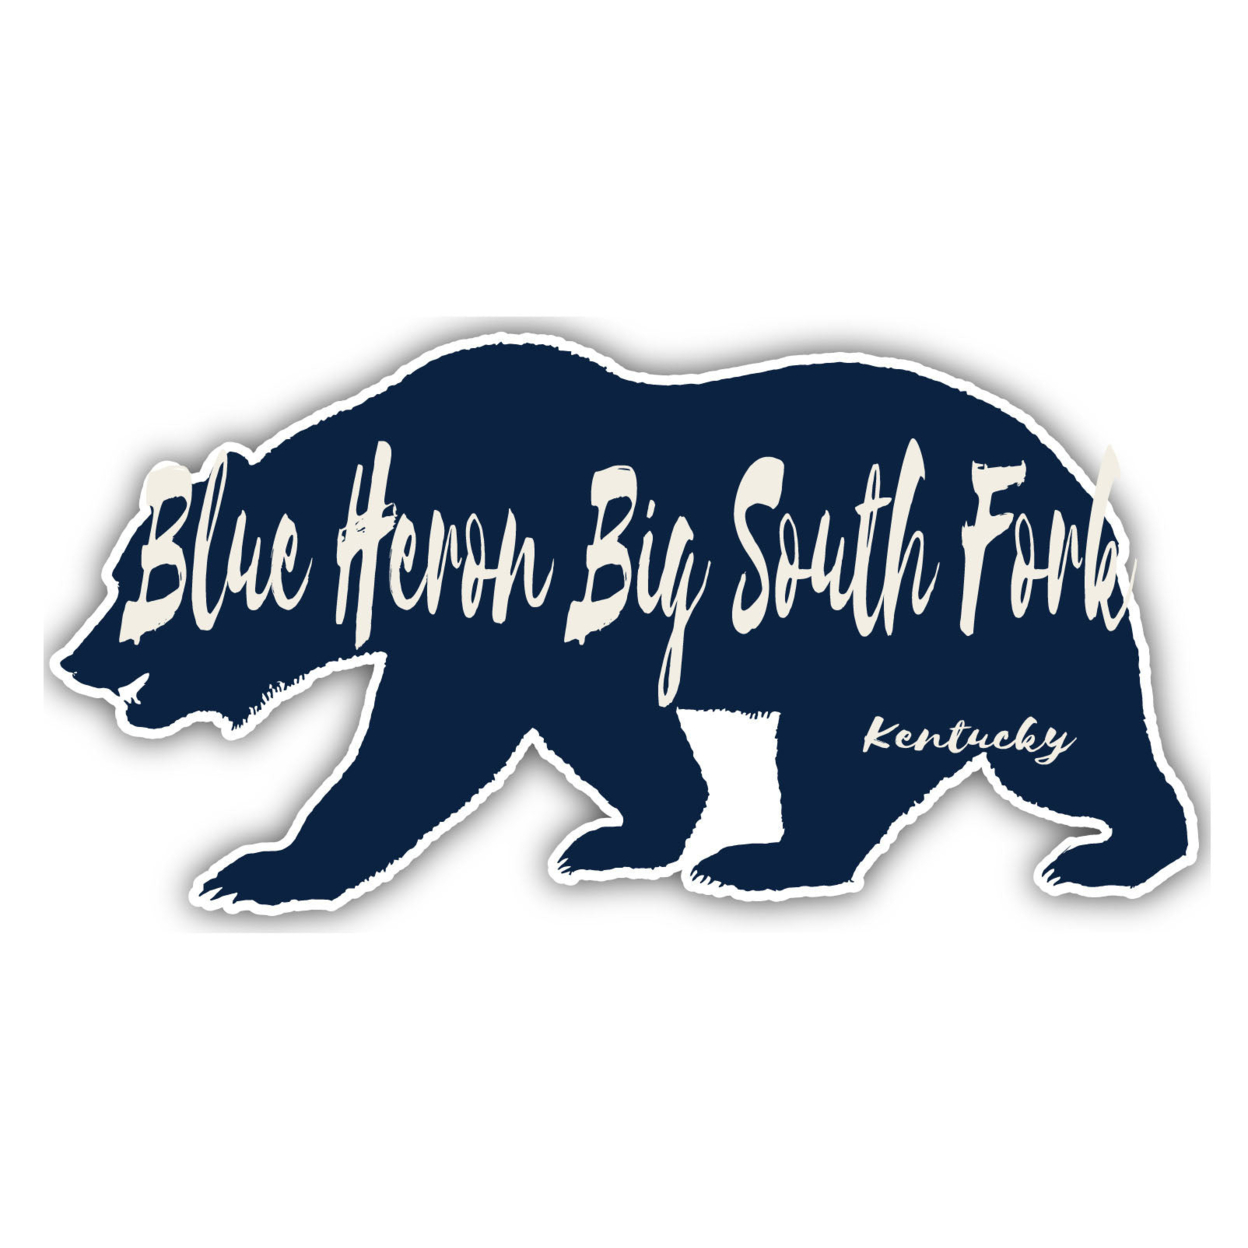 Blue Heron Big South Fork Kentucky Souvenir Decorative Stickers (Choose Theme And Size) - 4-Pack, 12-Inch, Bear